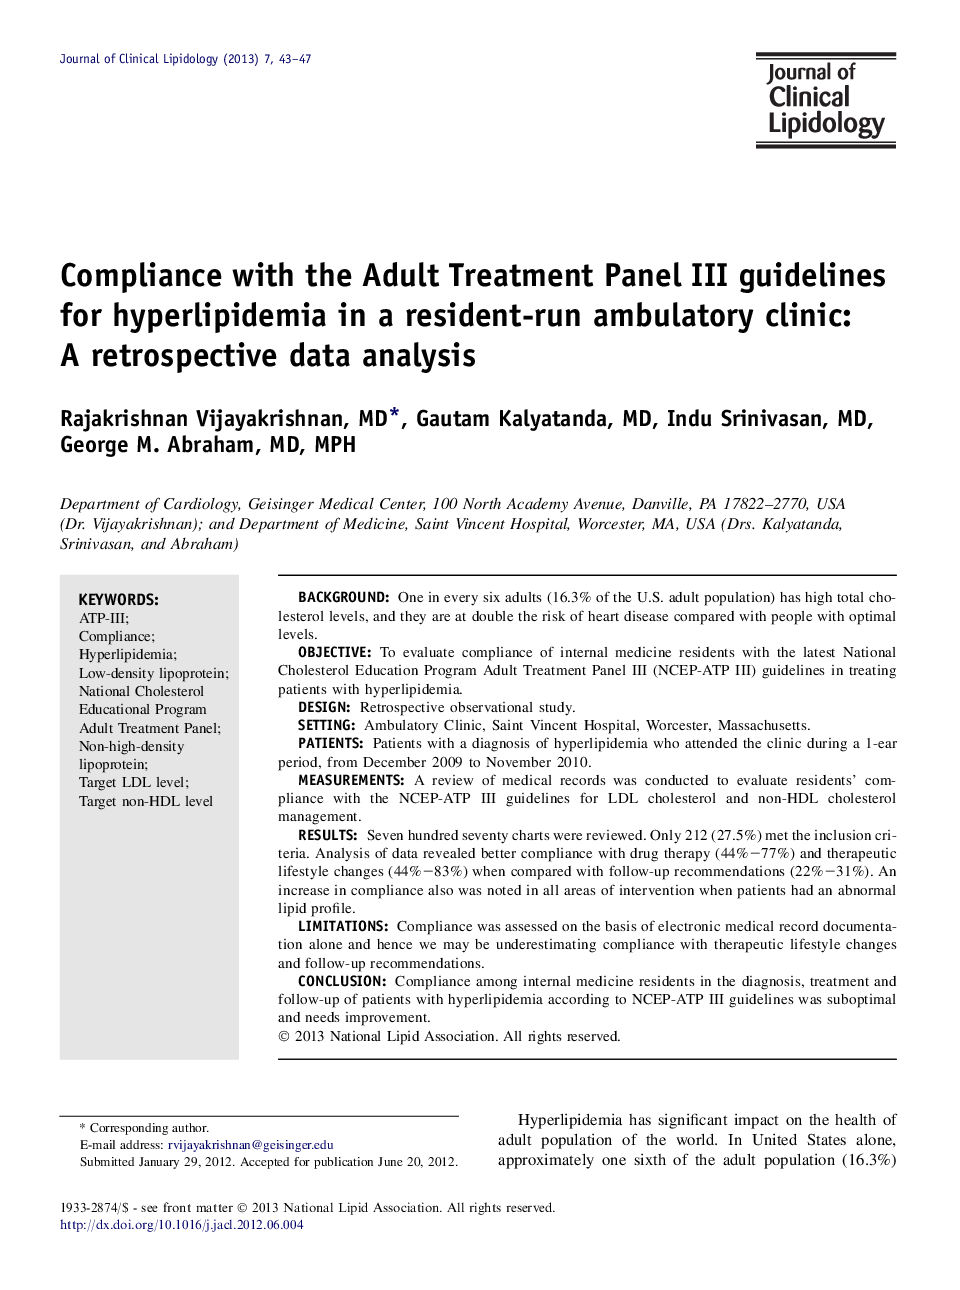 Compliance with the Adult Treatment Panel III guidelines for hyperlipidemia in a resident-run ambulatory clinic: A retrospective data analysis